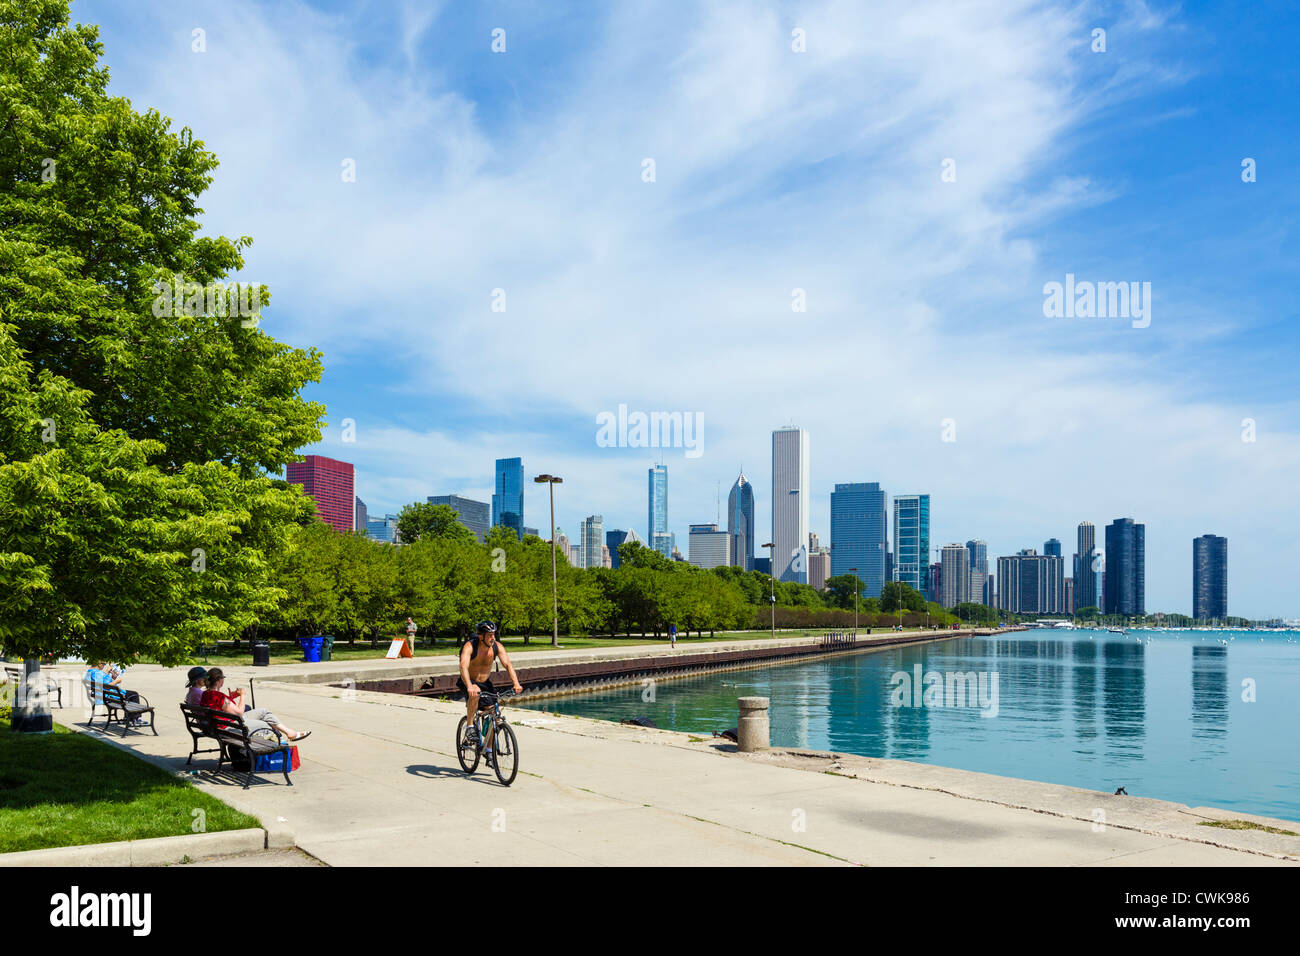 The city skyline from the lakefront in Grant Park, Chicago, Illinois, USA Stock Photo